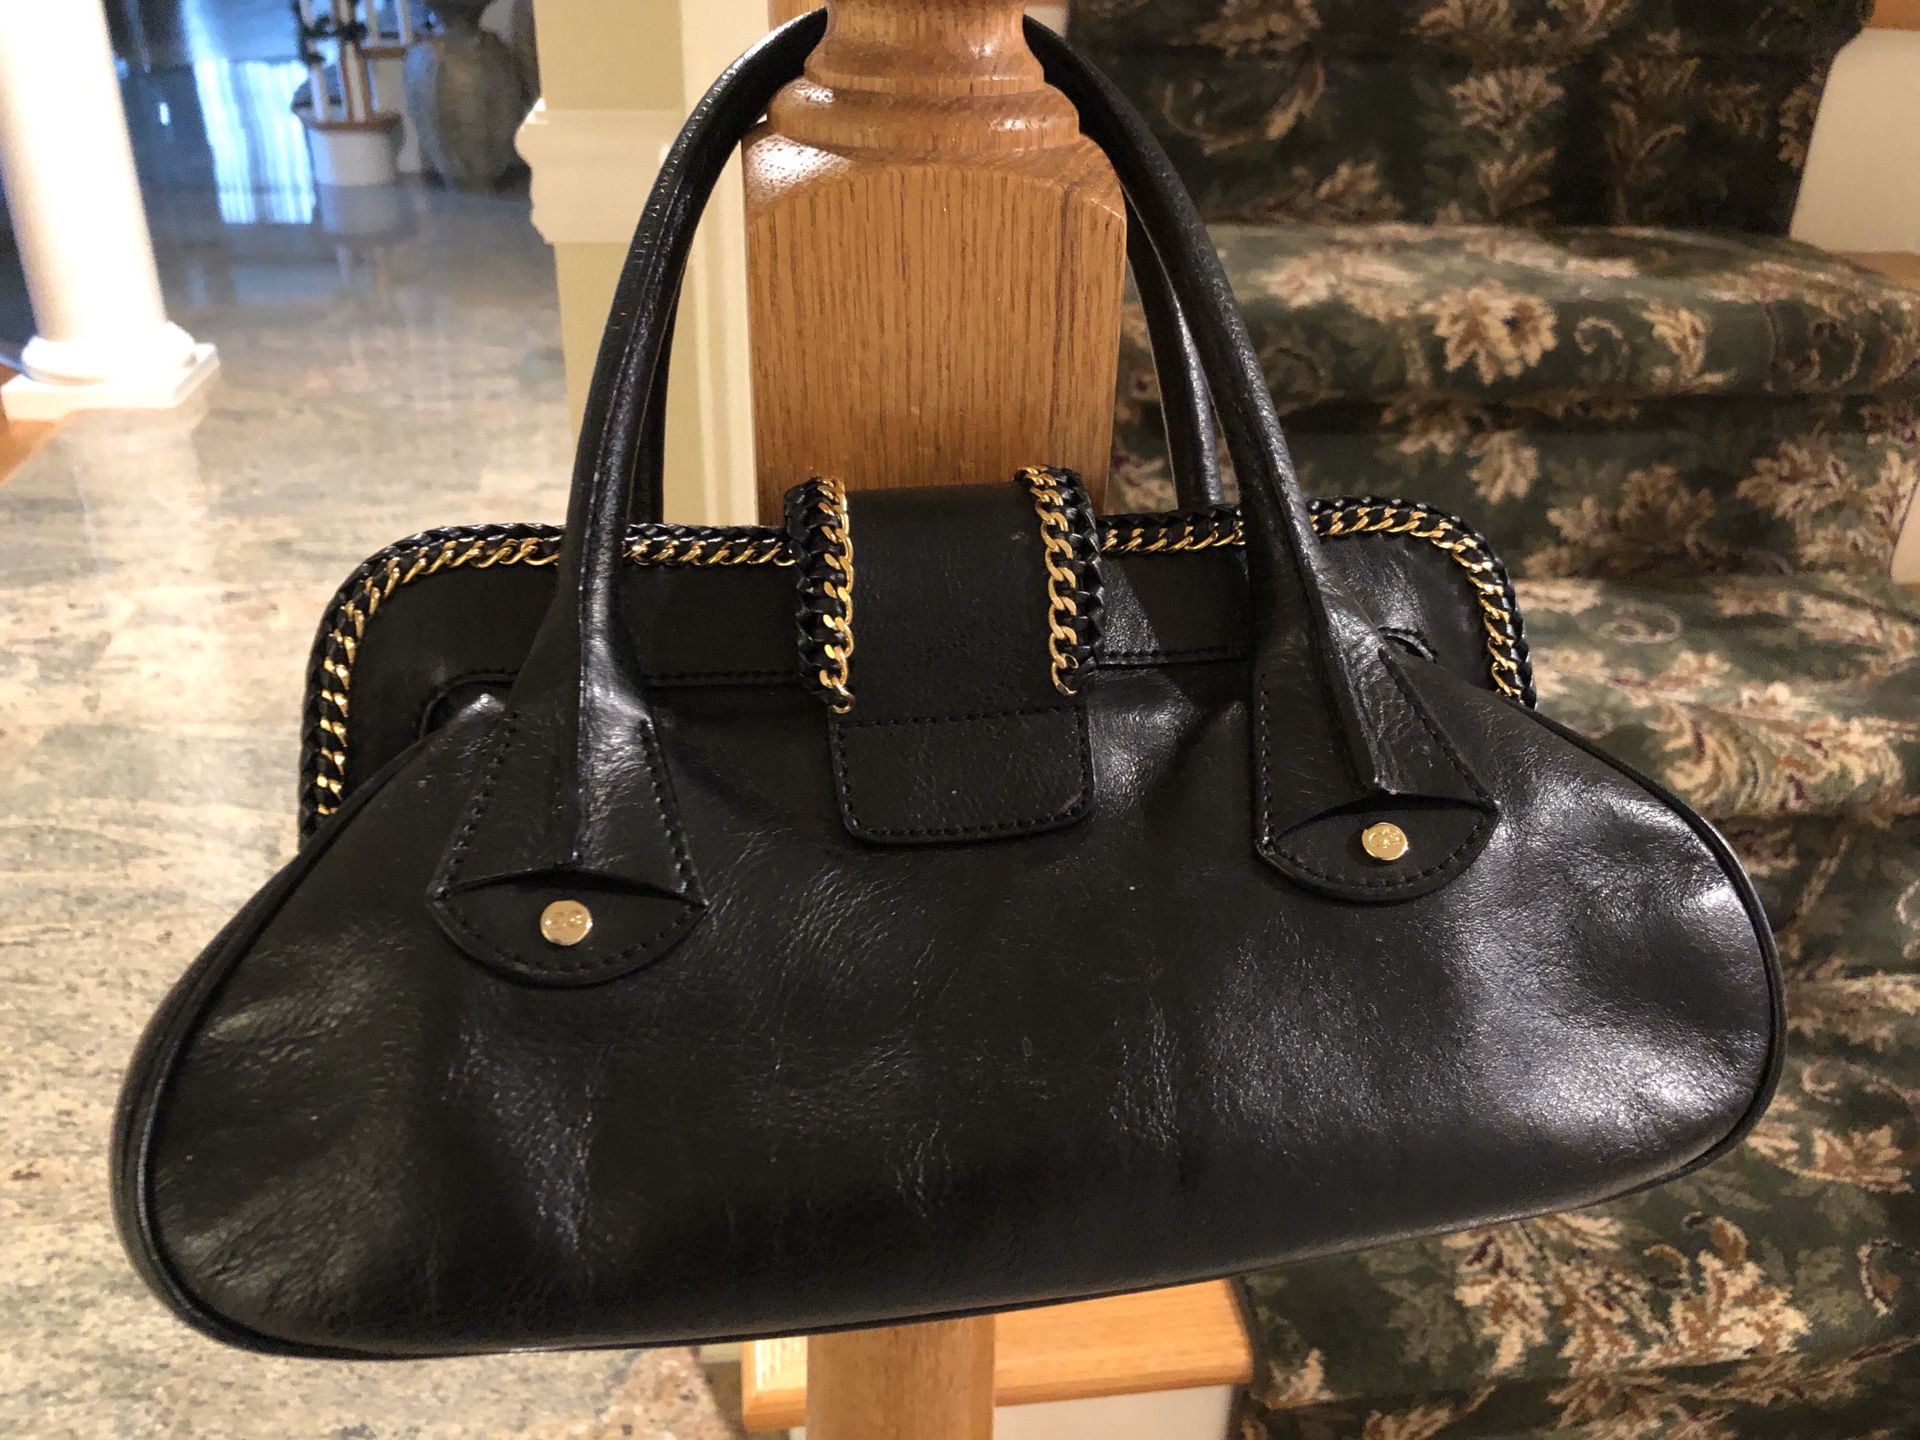 Black Leather Laptop Bag for Sale in New Rochelle, NY - OfferUp